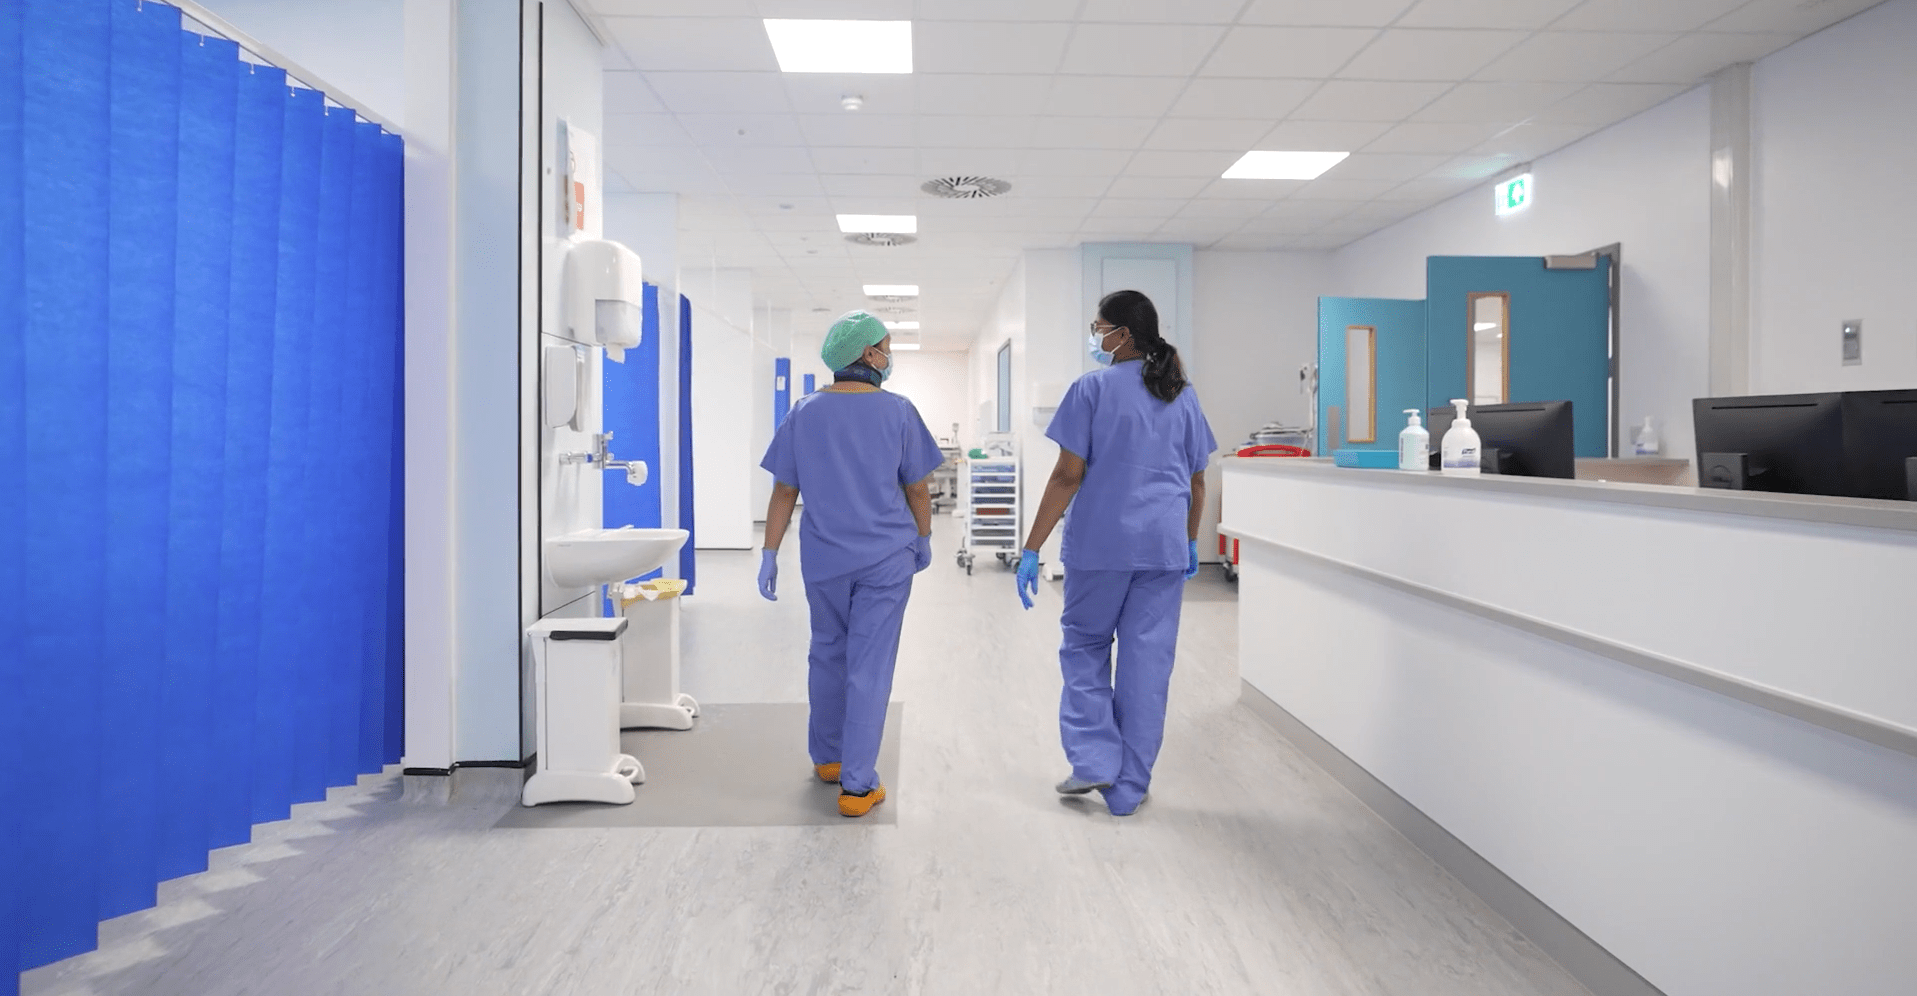 Two clinicians in blue scrubs, walking down a brightly lit, new hospital ward, with bed bays to their left, surrounded by blue curtains, and a nurse's station to the right.